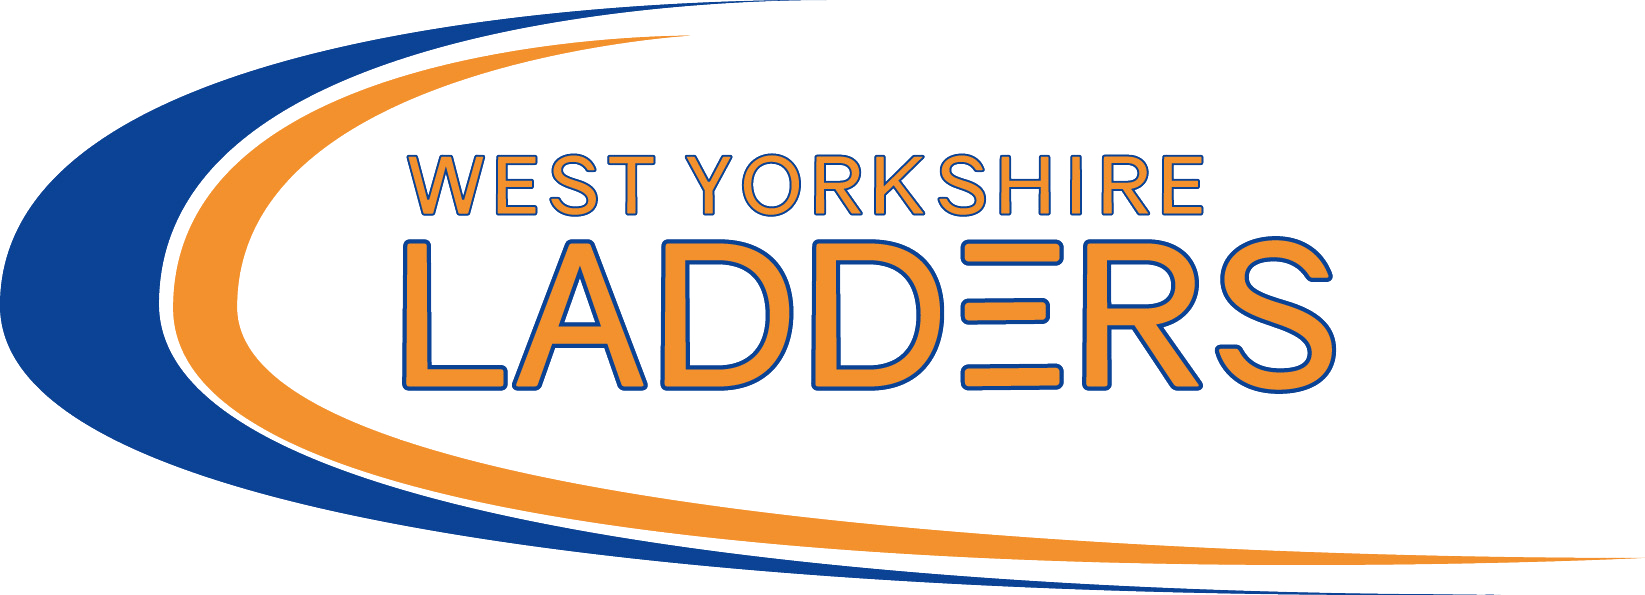 West Yorkshire Ladders